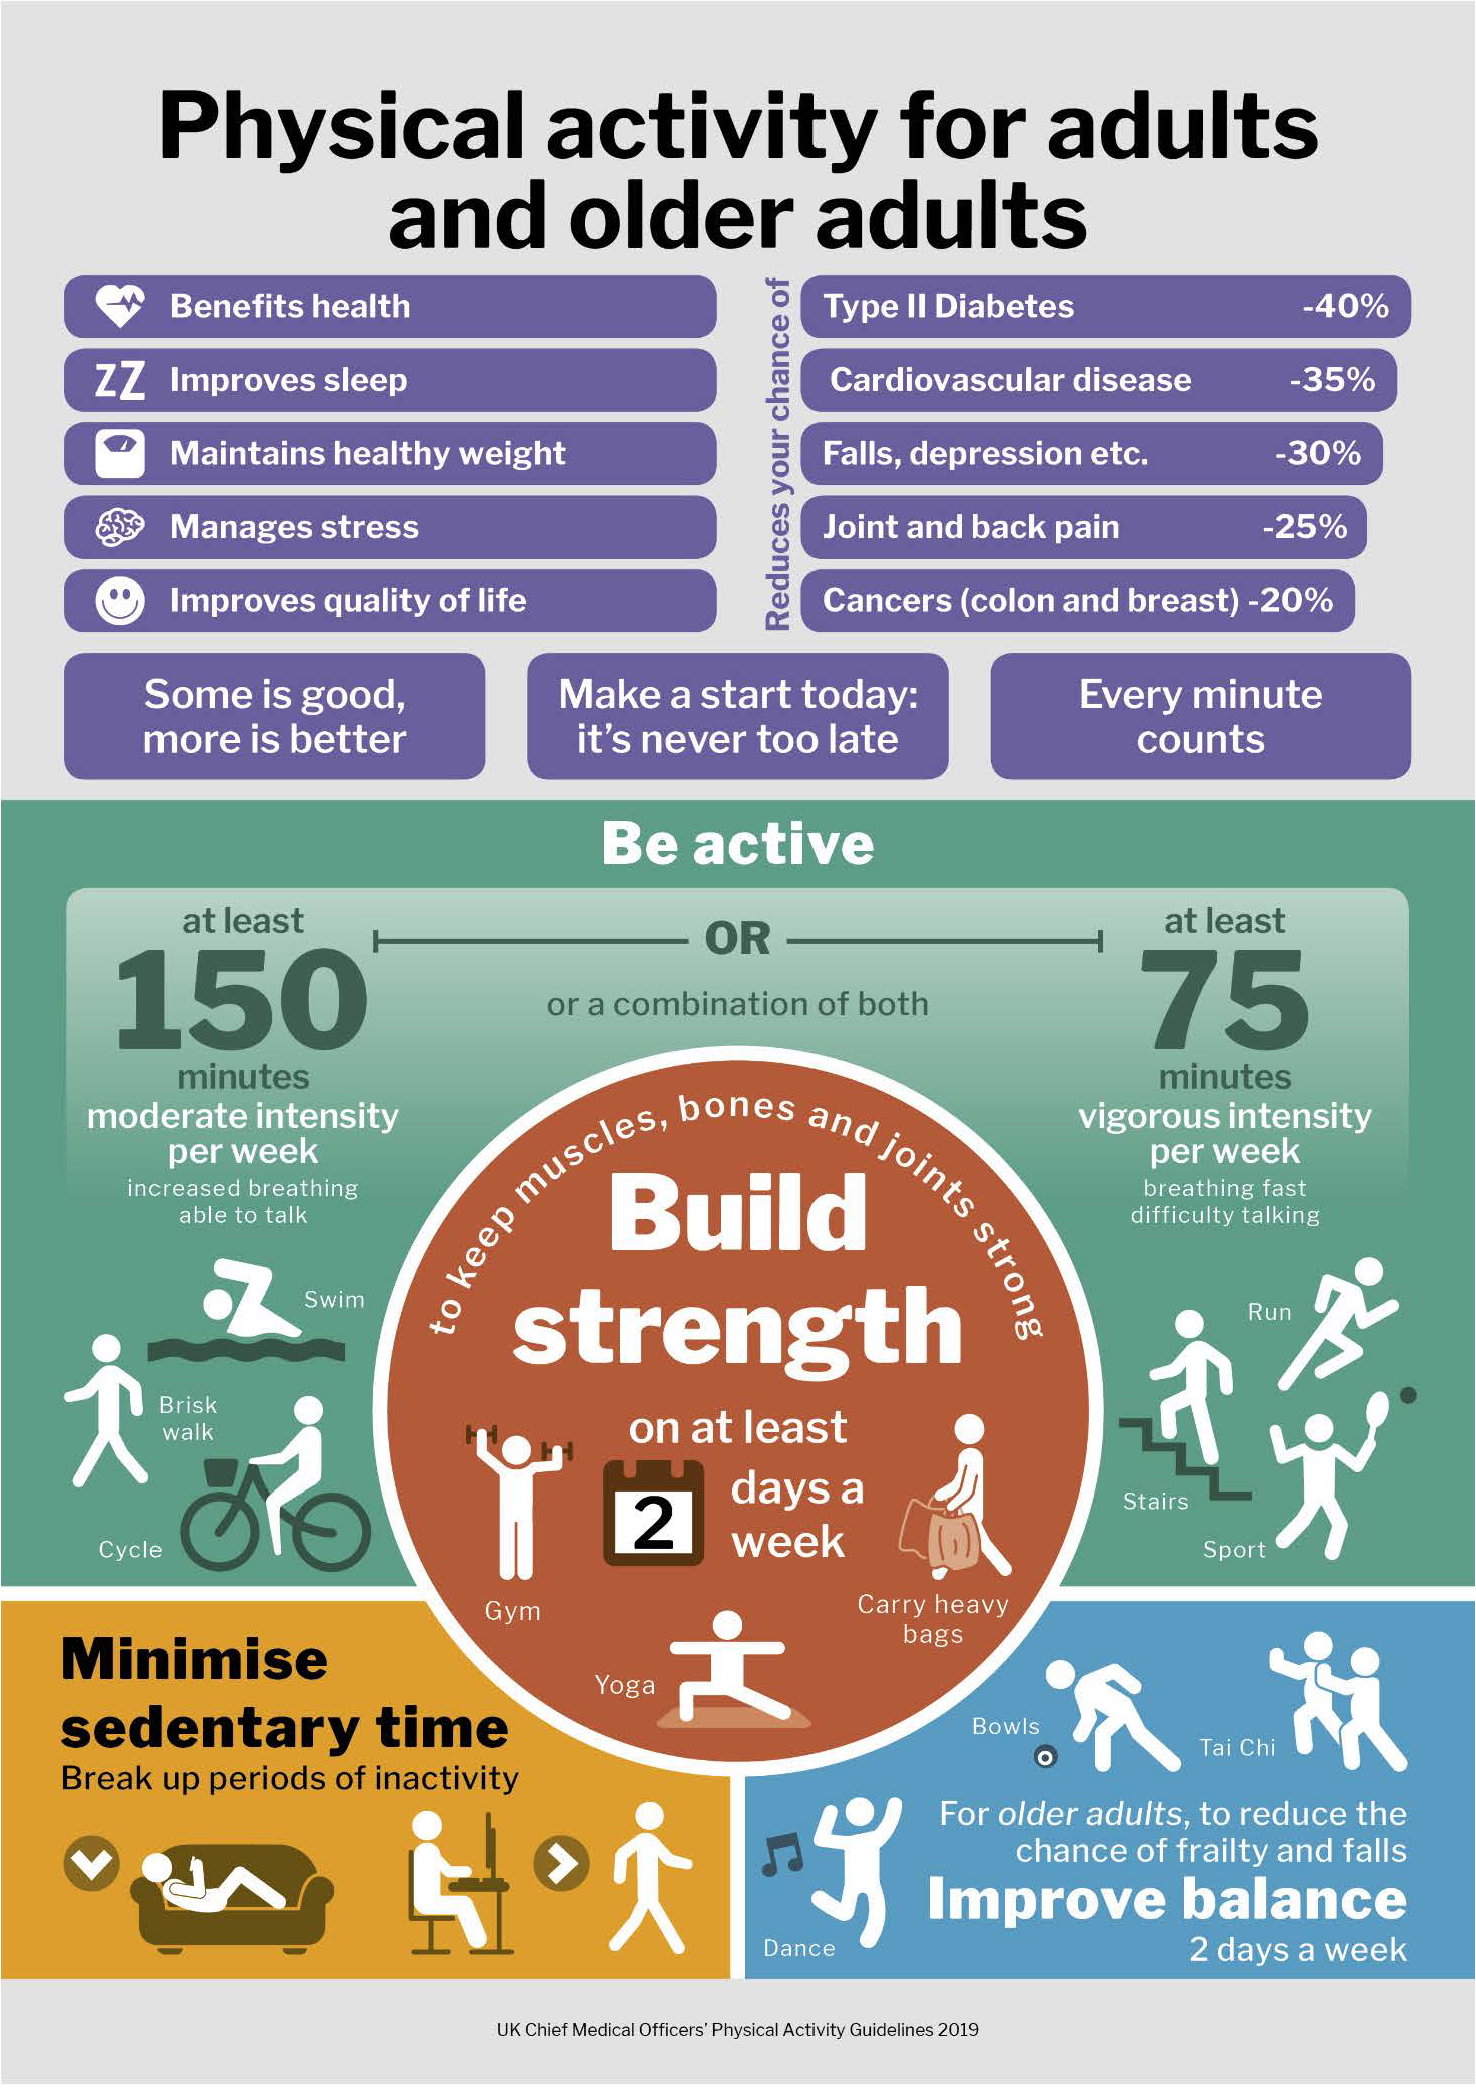 Physical activity for adults and older adults gov.uk infographic